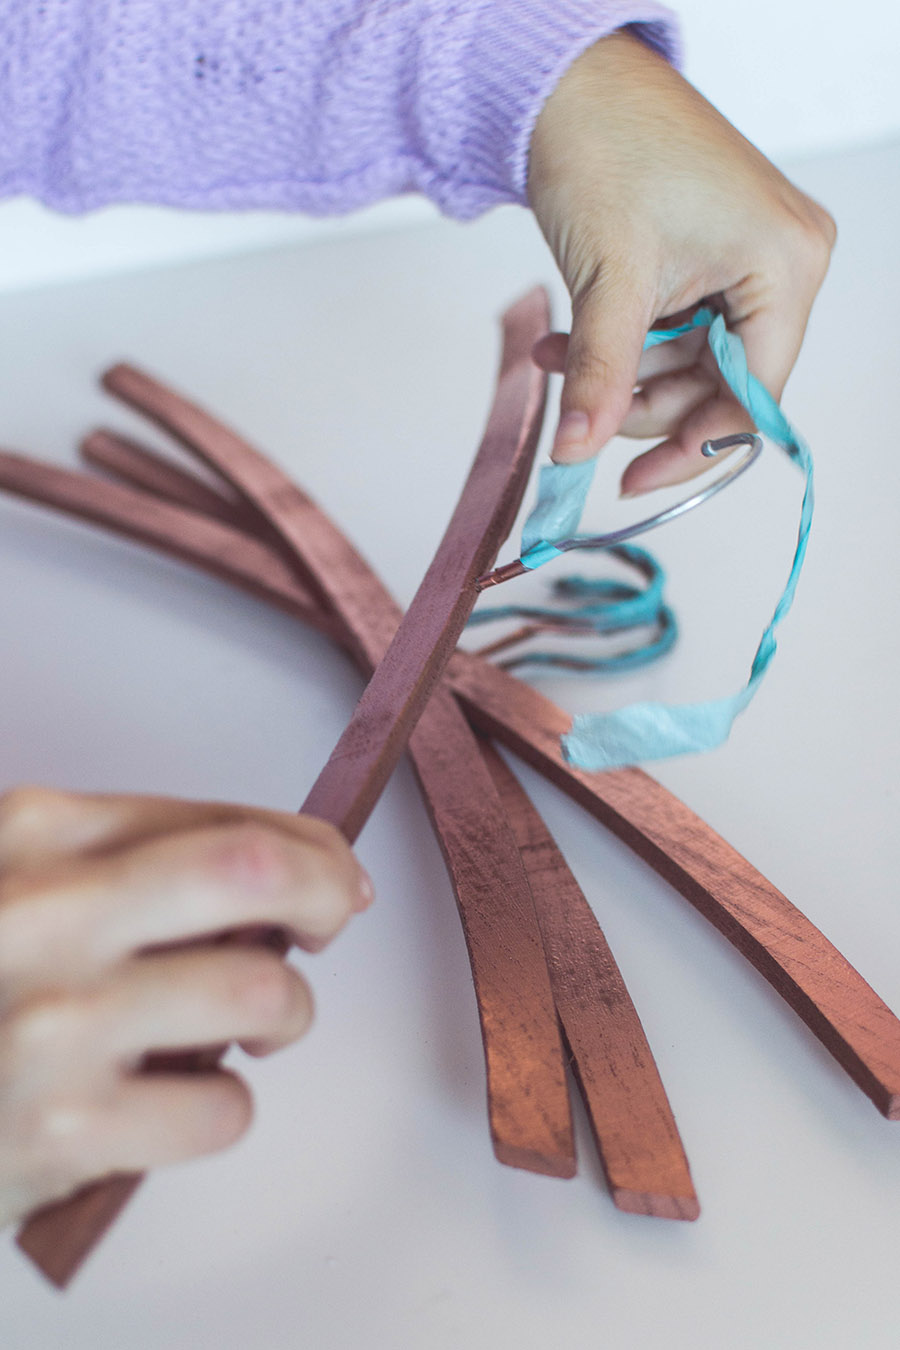 DIY rose gold hangers: remove the washi tape